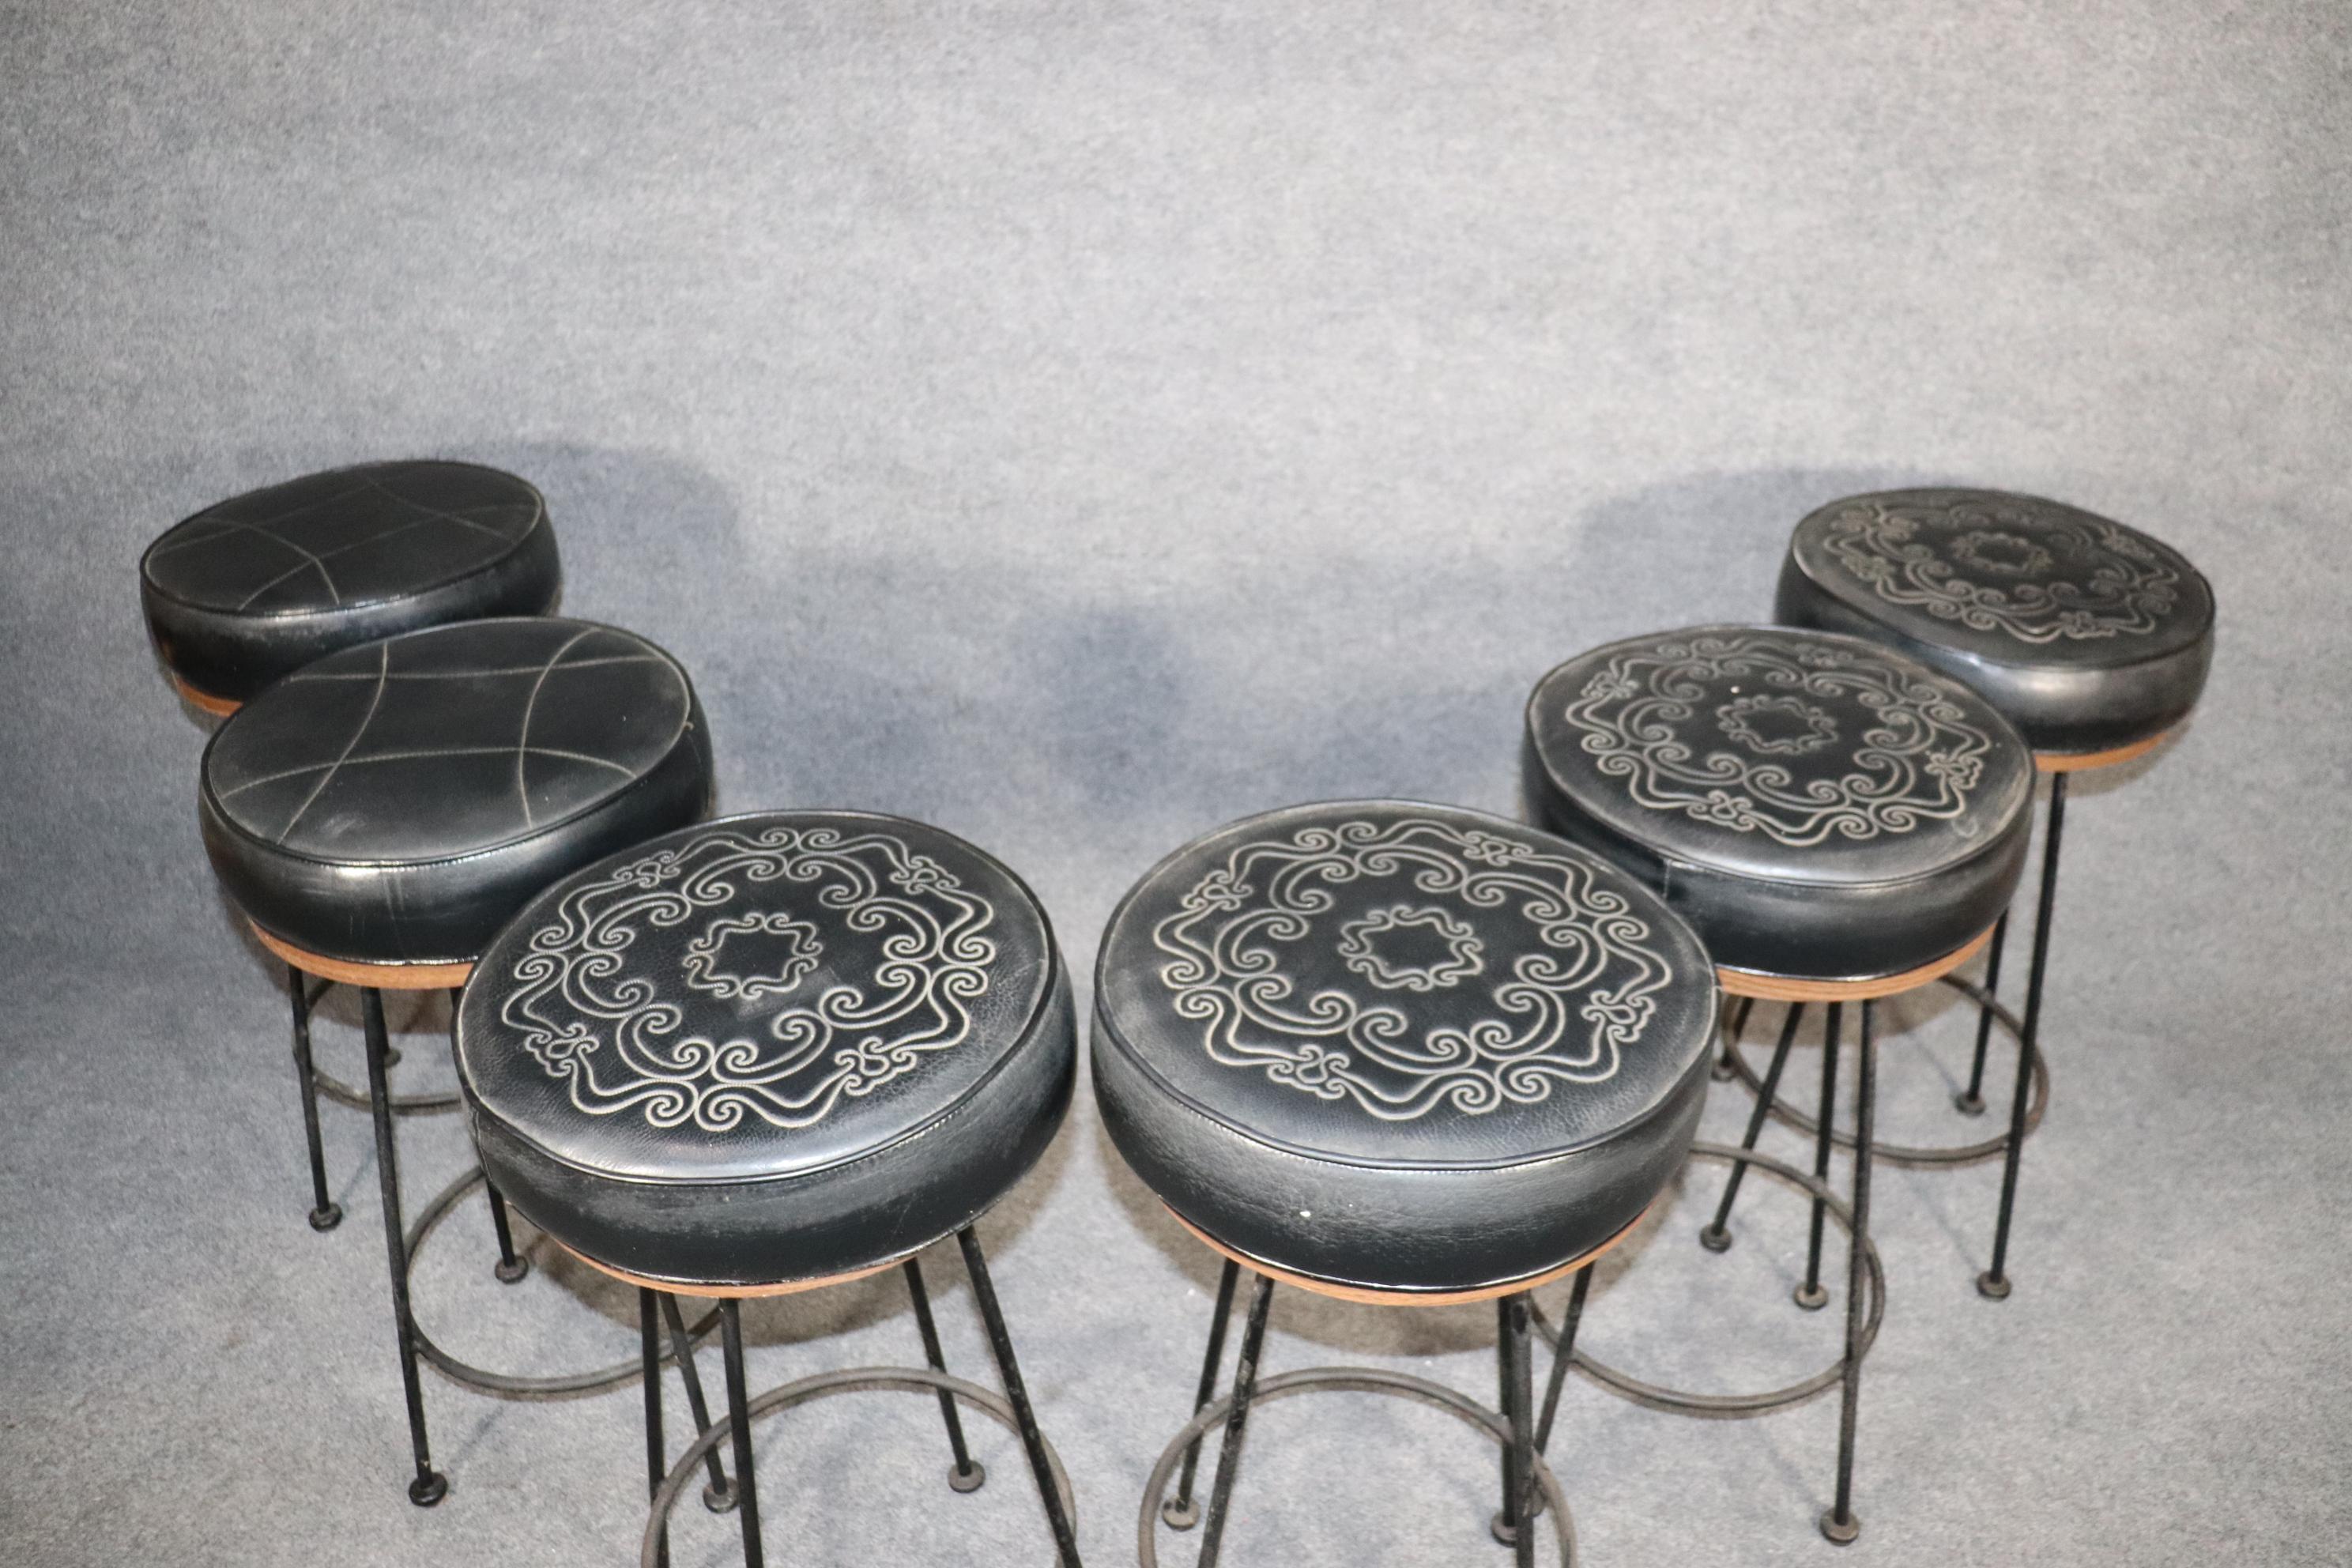 Set of six midcentury stools made of strong iron with vinyl seats. Simple 60s style for indoor or outdoor use.
Please confirm location NY or NJ.